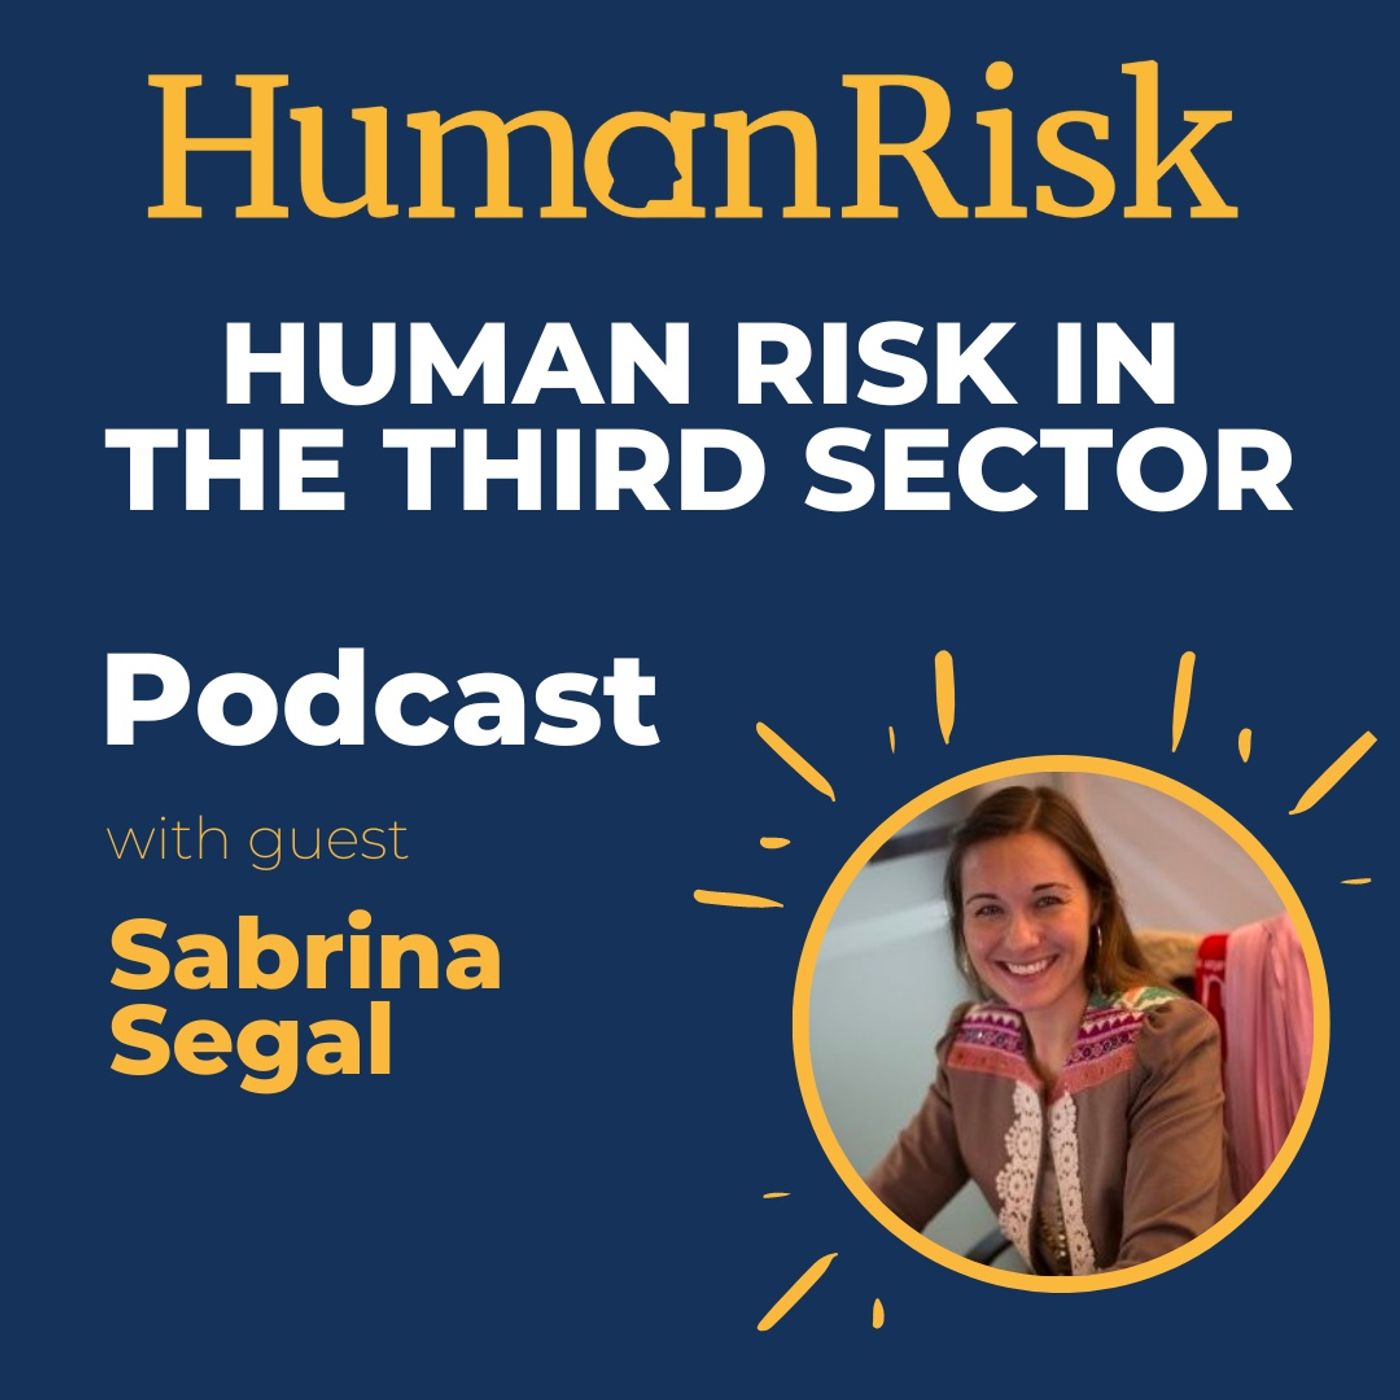 Sabrina Segal on Human Risk In The Third Sector